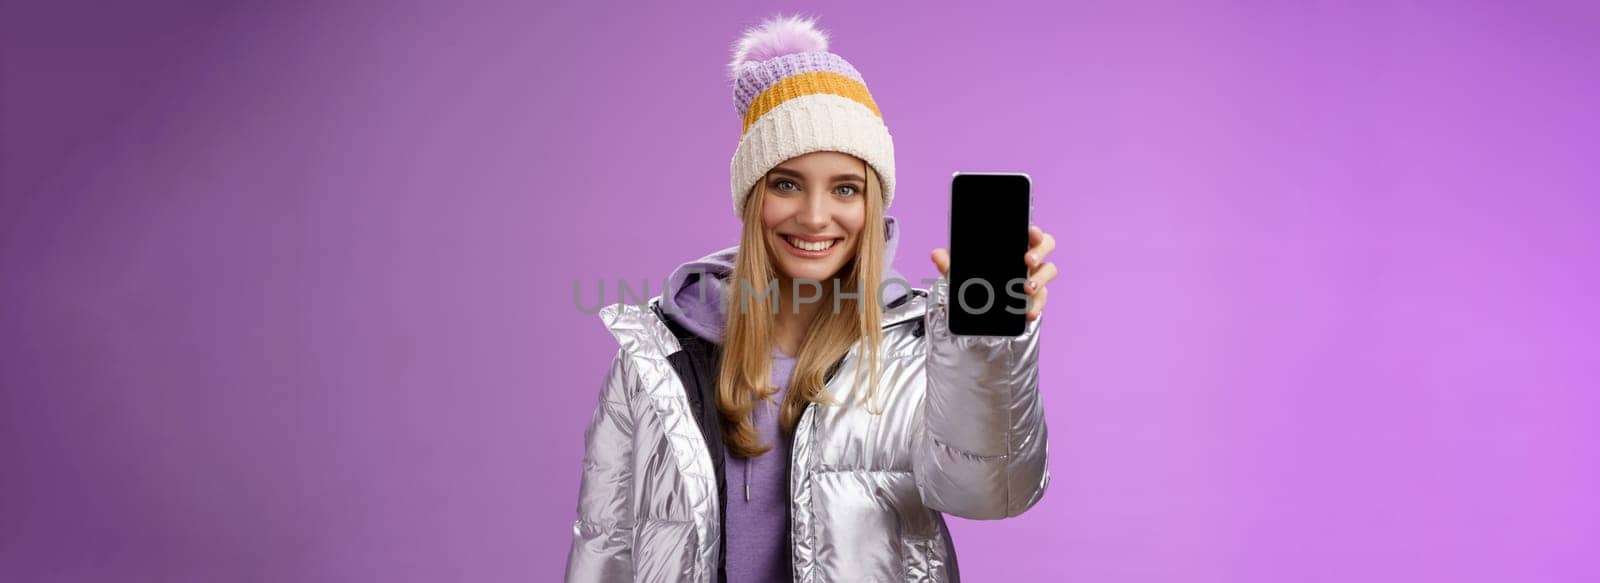 Lifestyle. Friendly cheerful confident blond girl in silver stylish winter jacket hat extend arm showing smartphone display advertising awesome new device app smiling self-assured recommend use mobile phone.